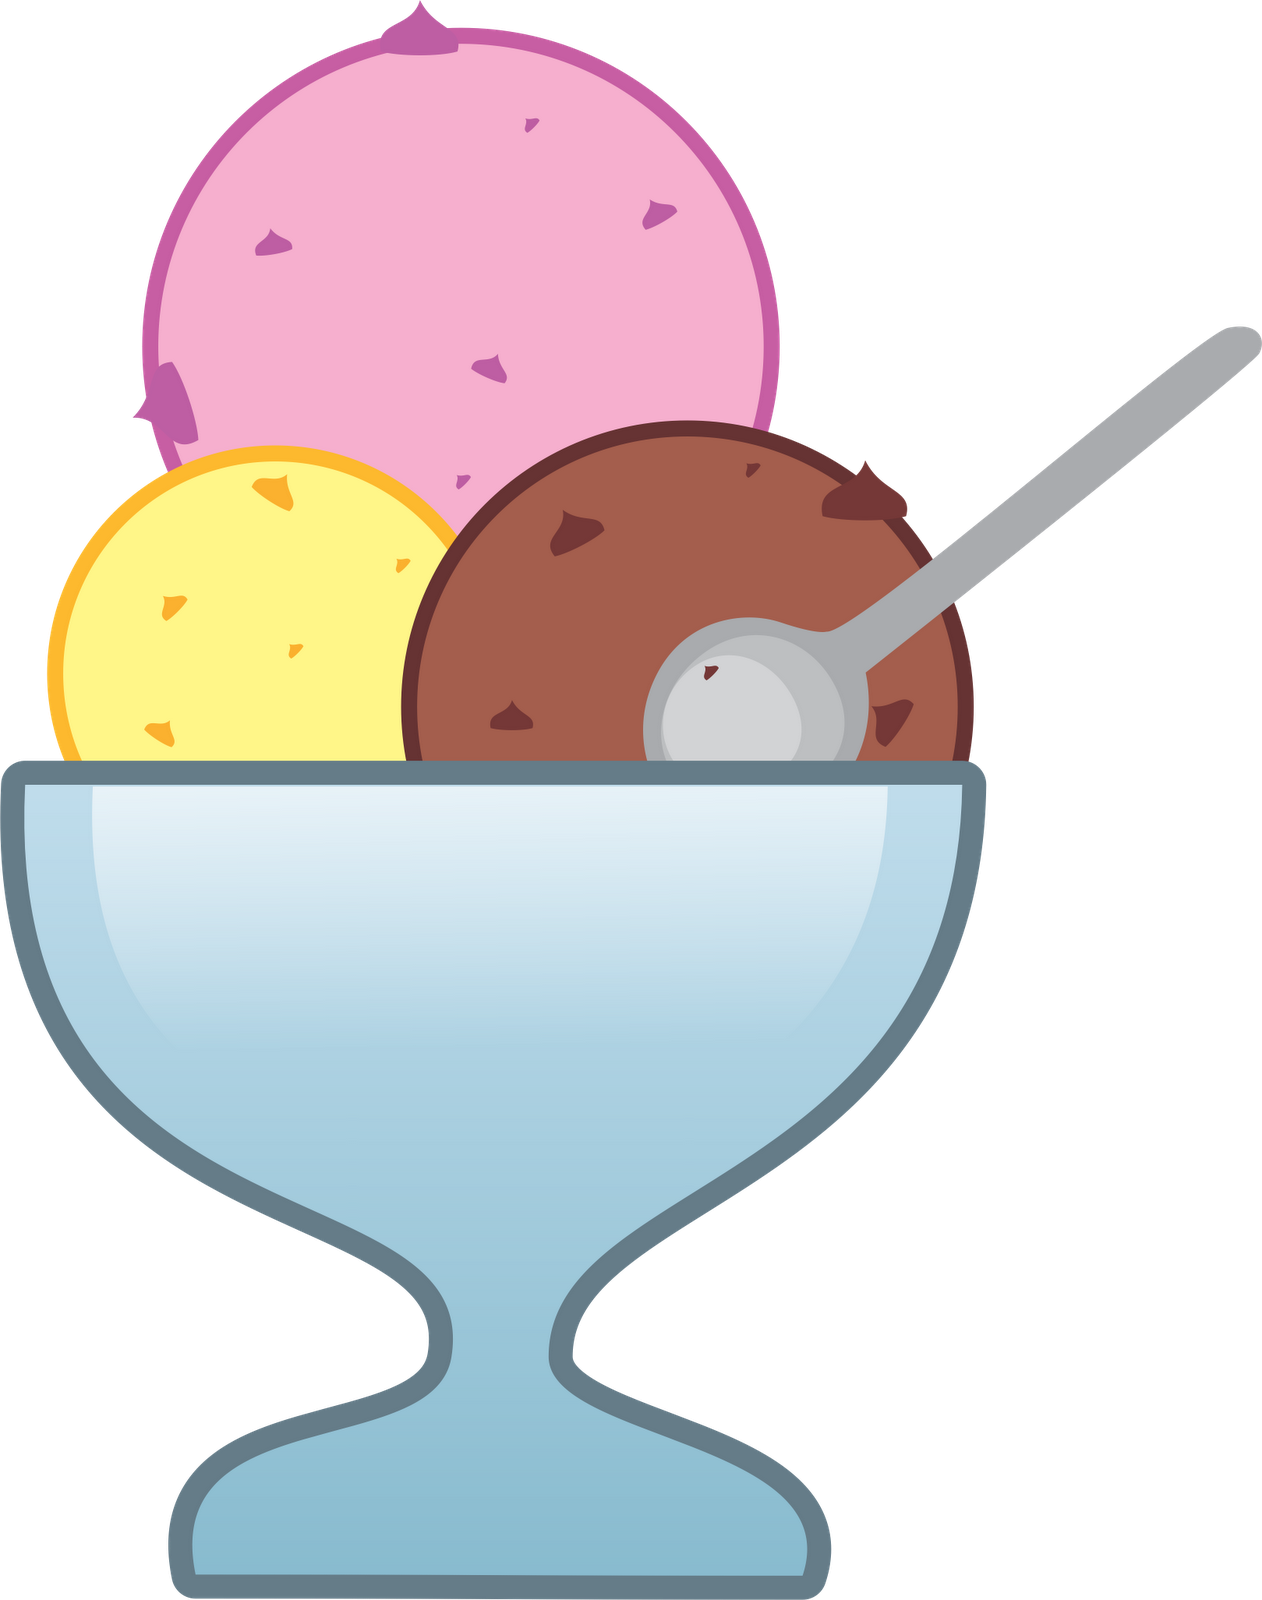 ice cream in a bowl clipart - photo #43